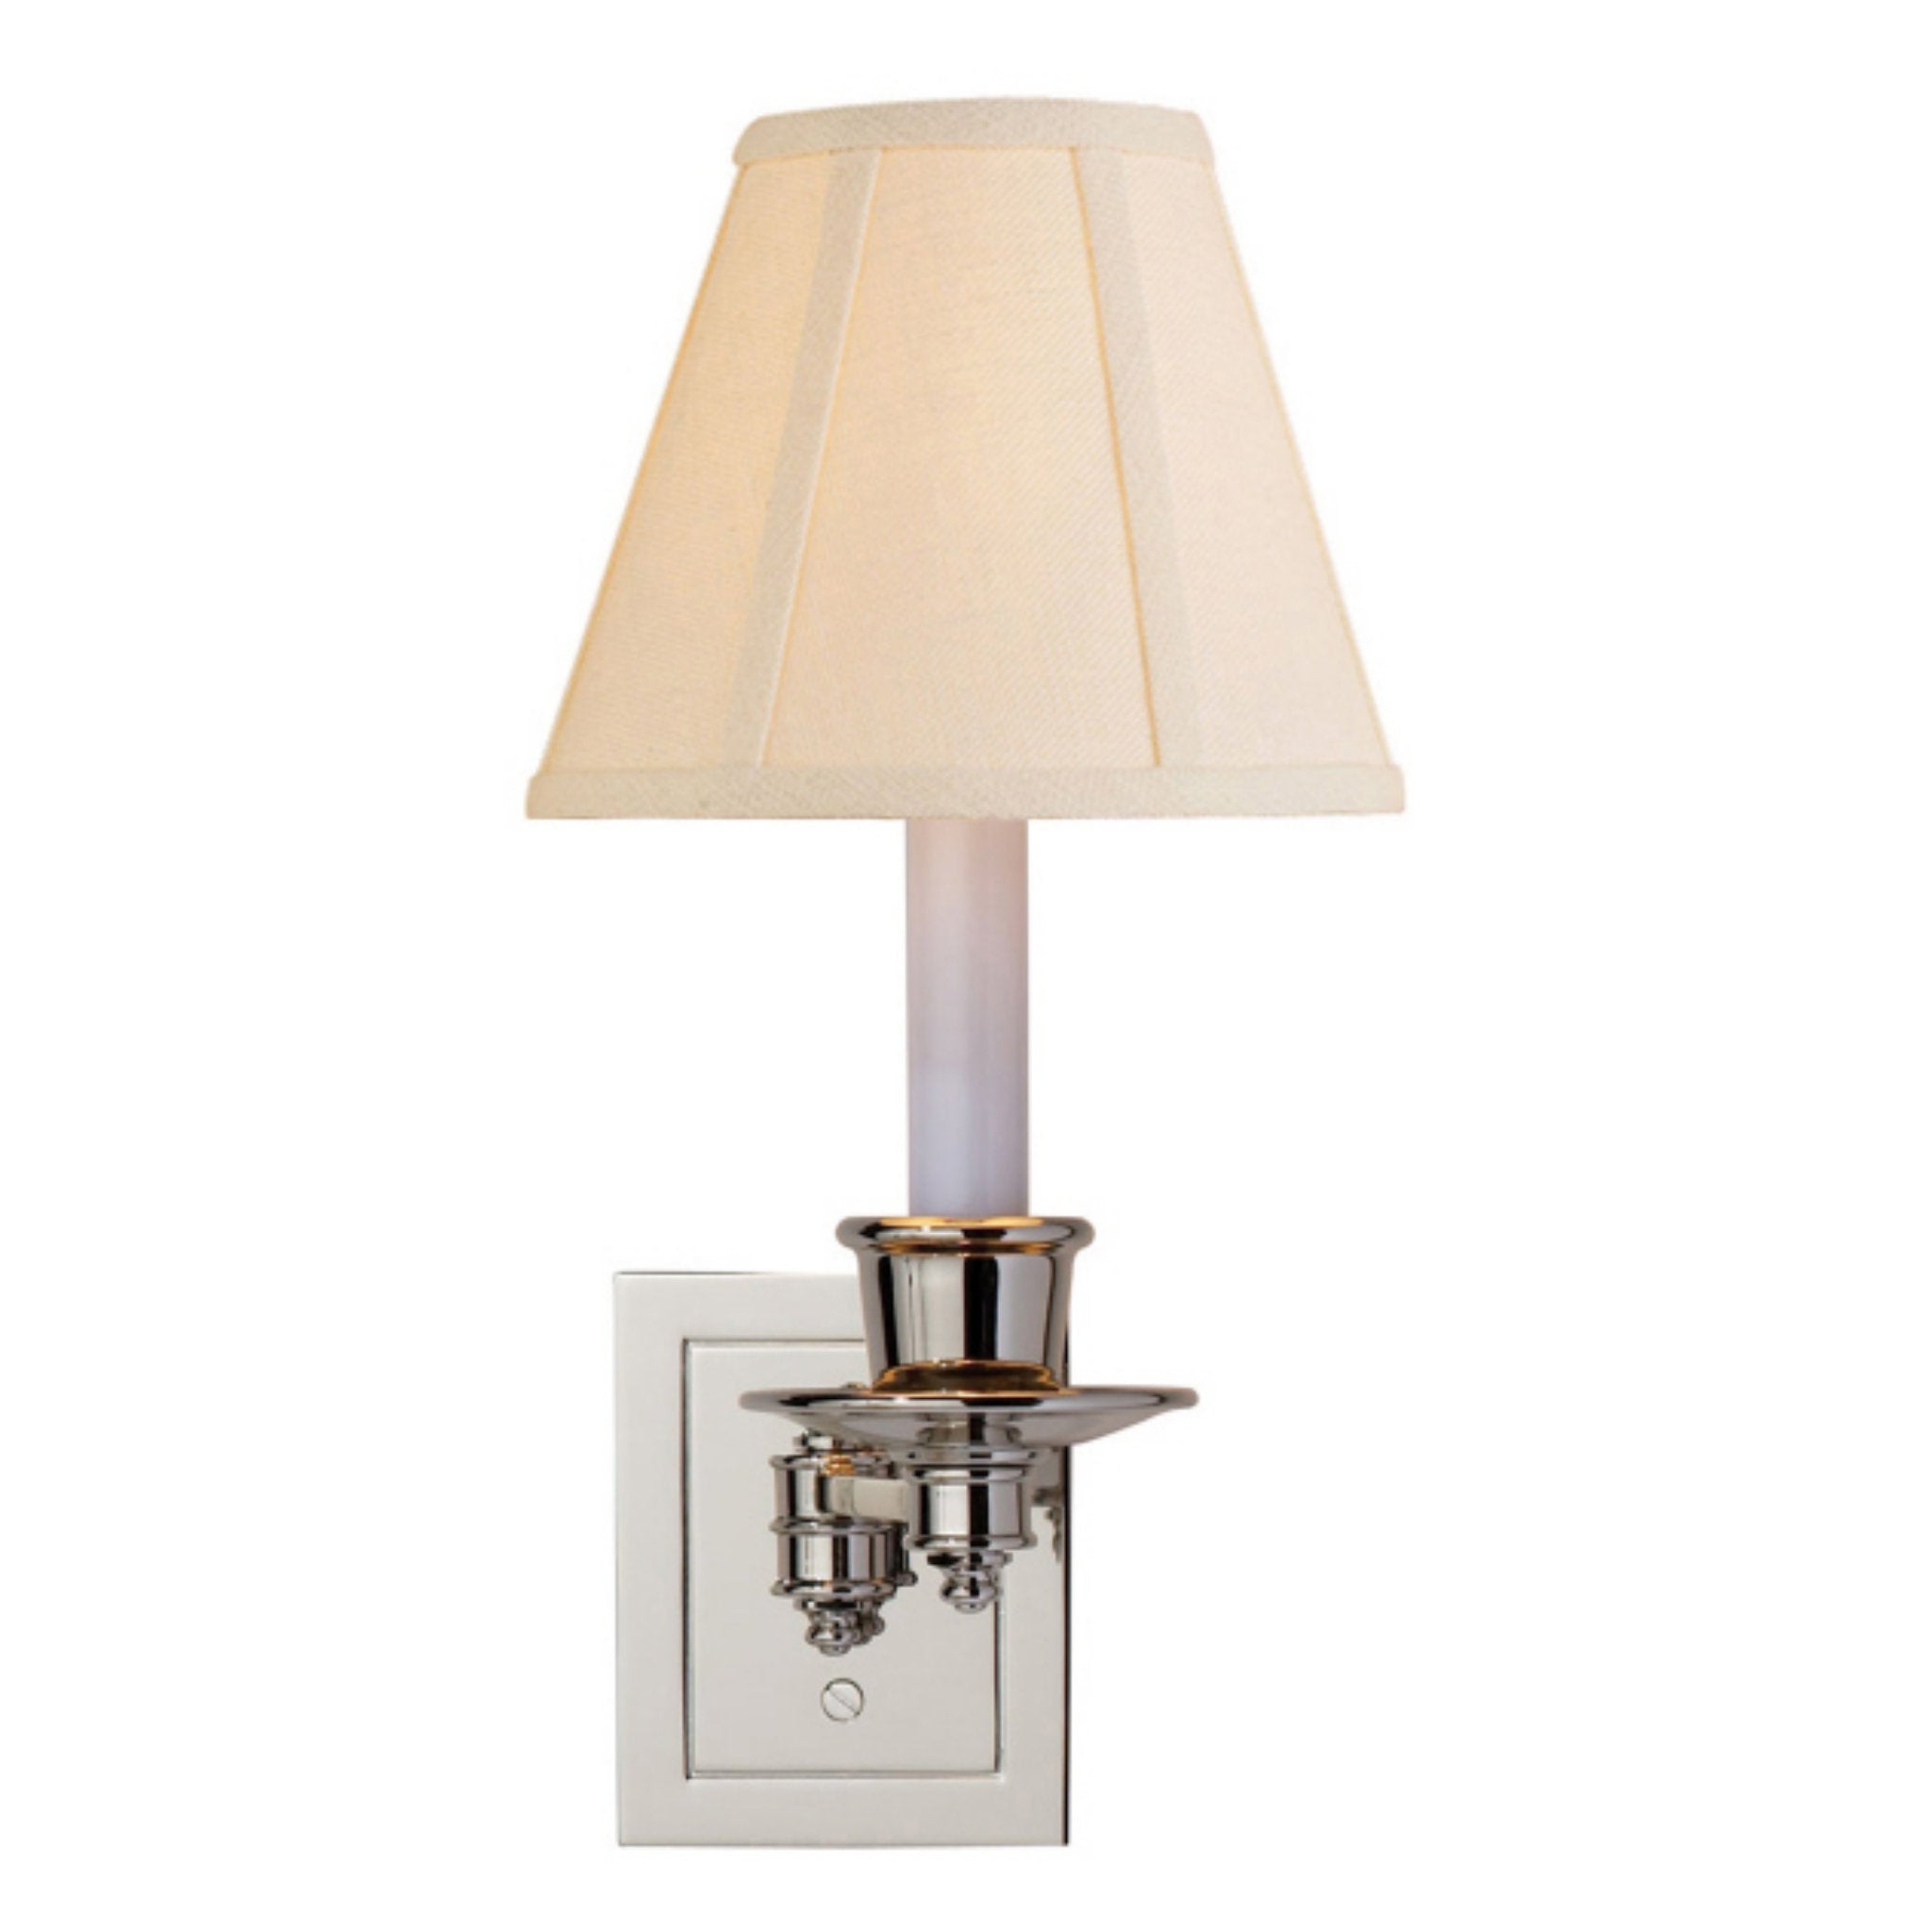 Visual Comfort Single Swing Arm Sconce in Polished Nickel with Linen Shade